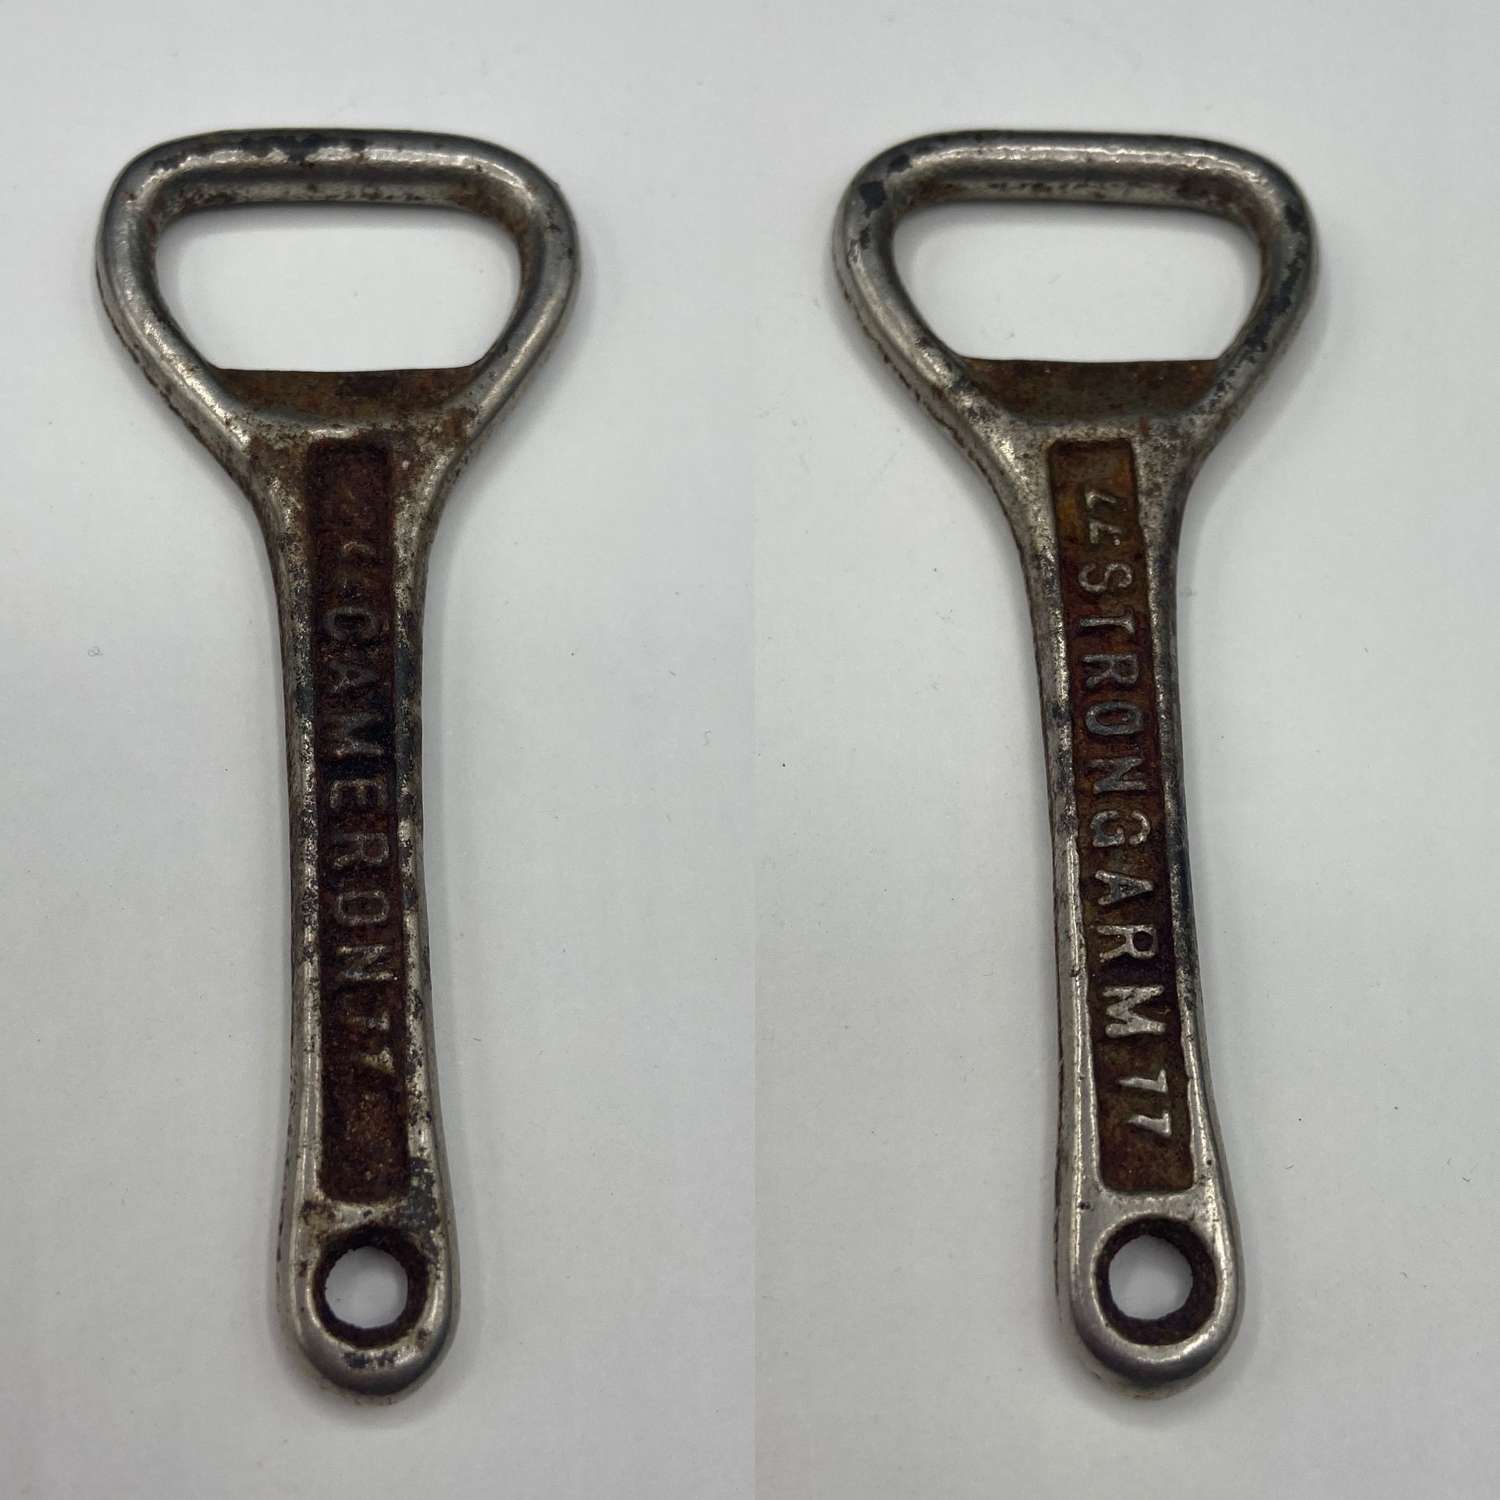 1940s to 1960s Advertising Cameron Strongarm Cast Iron Bottle Opener